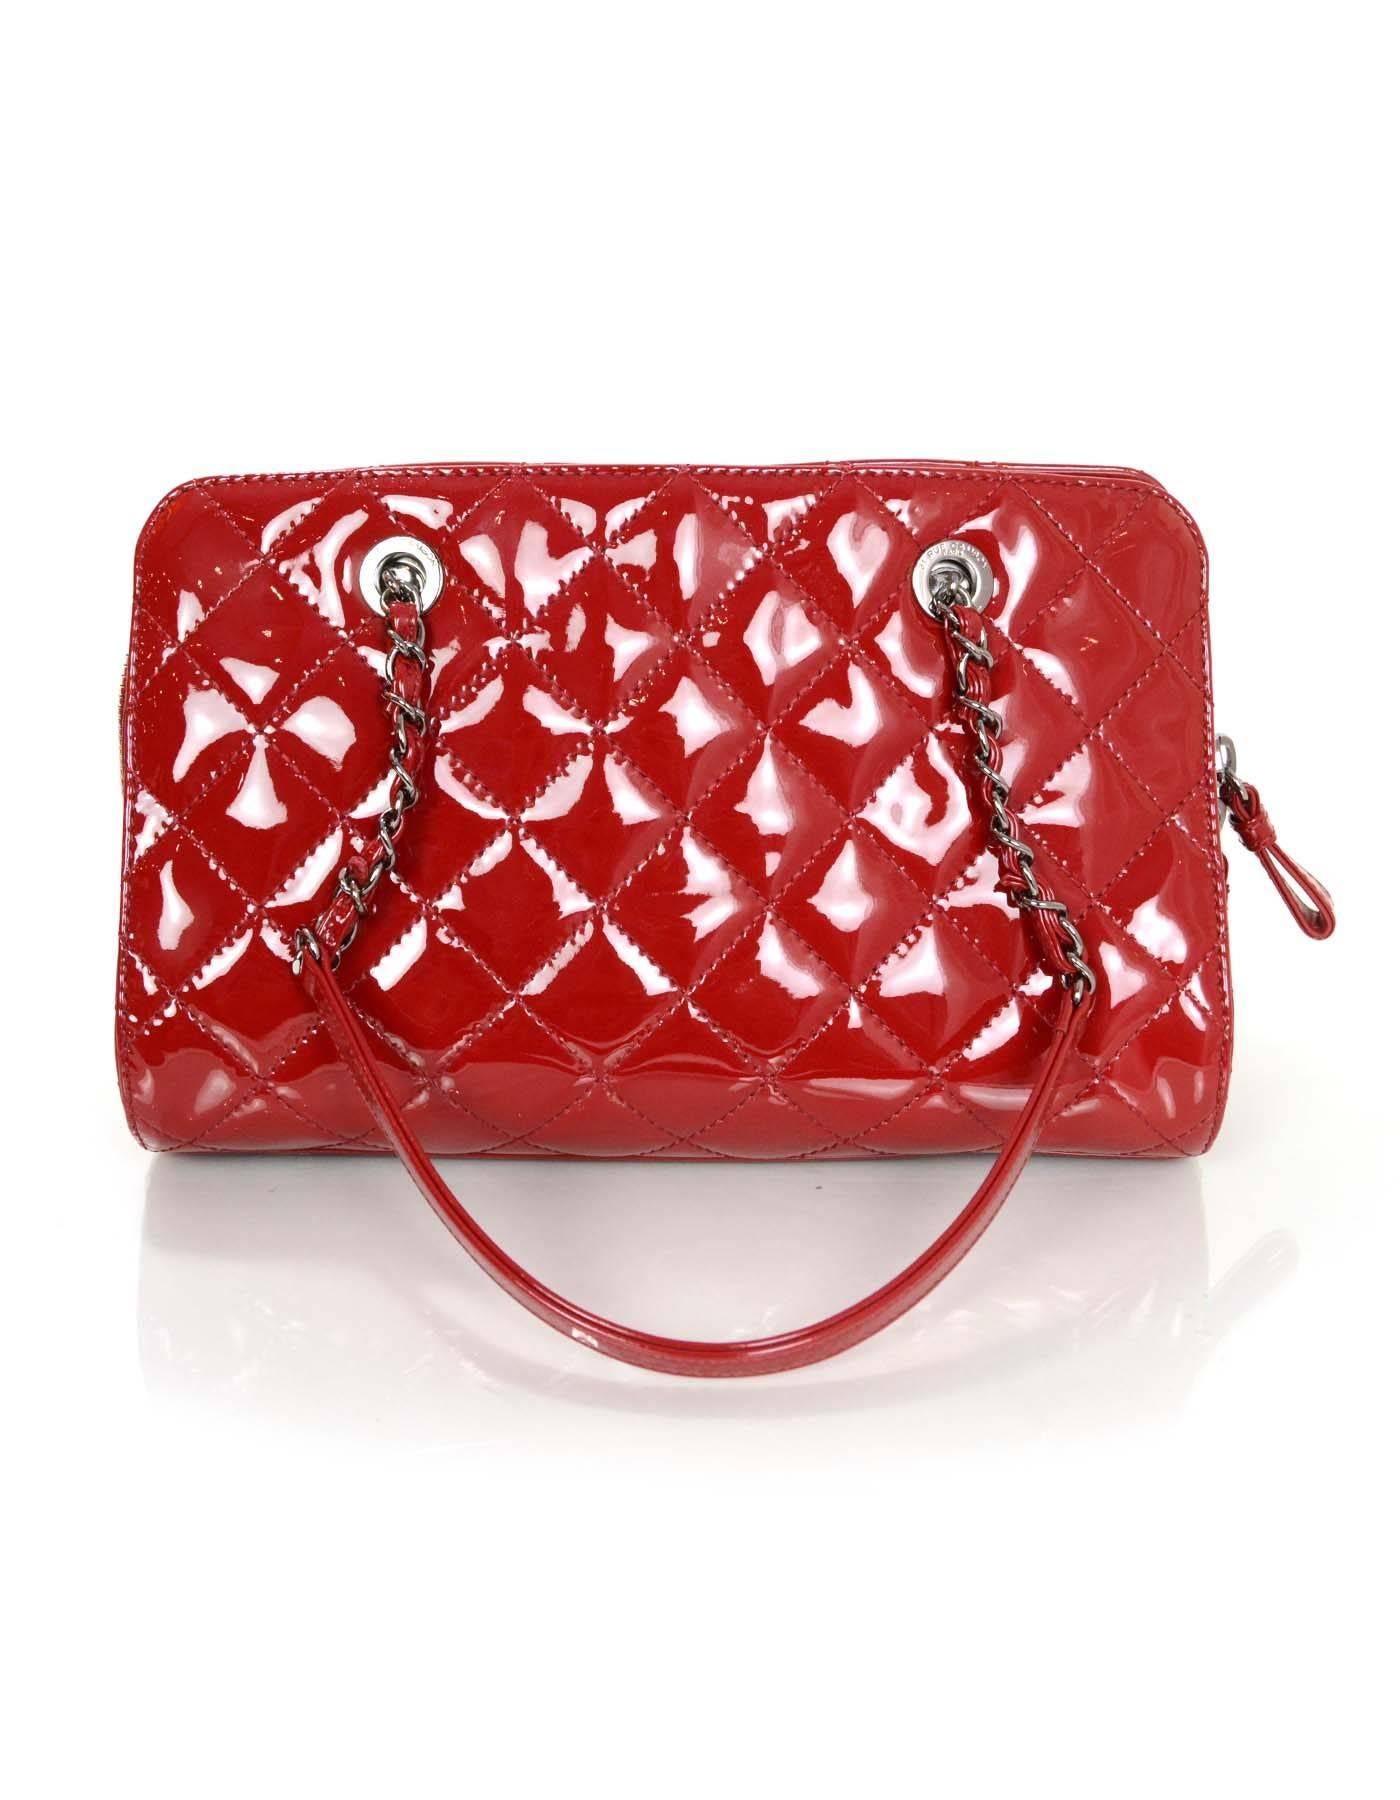 Women's Chanel 2014 Red Patent Leather Quilted Tote Bag rt. $3, 900